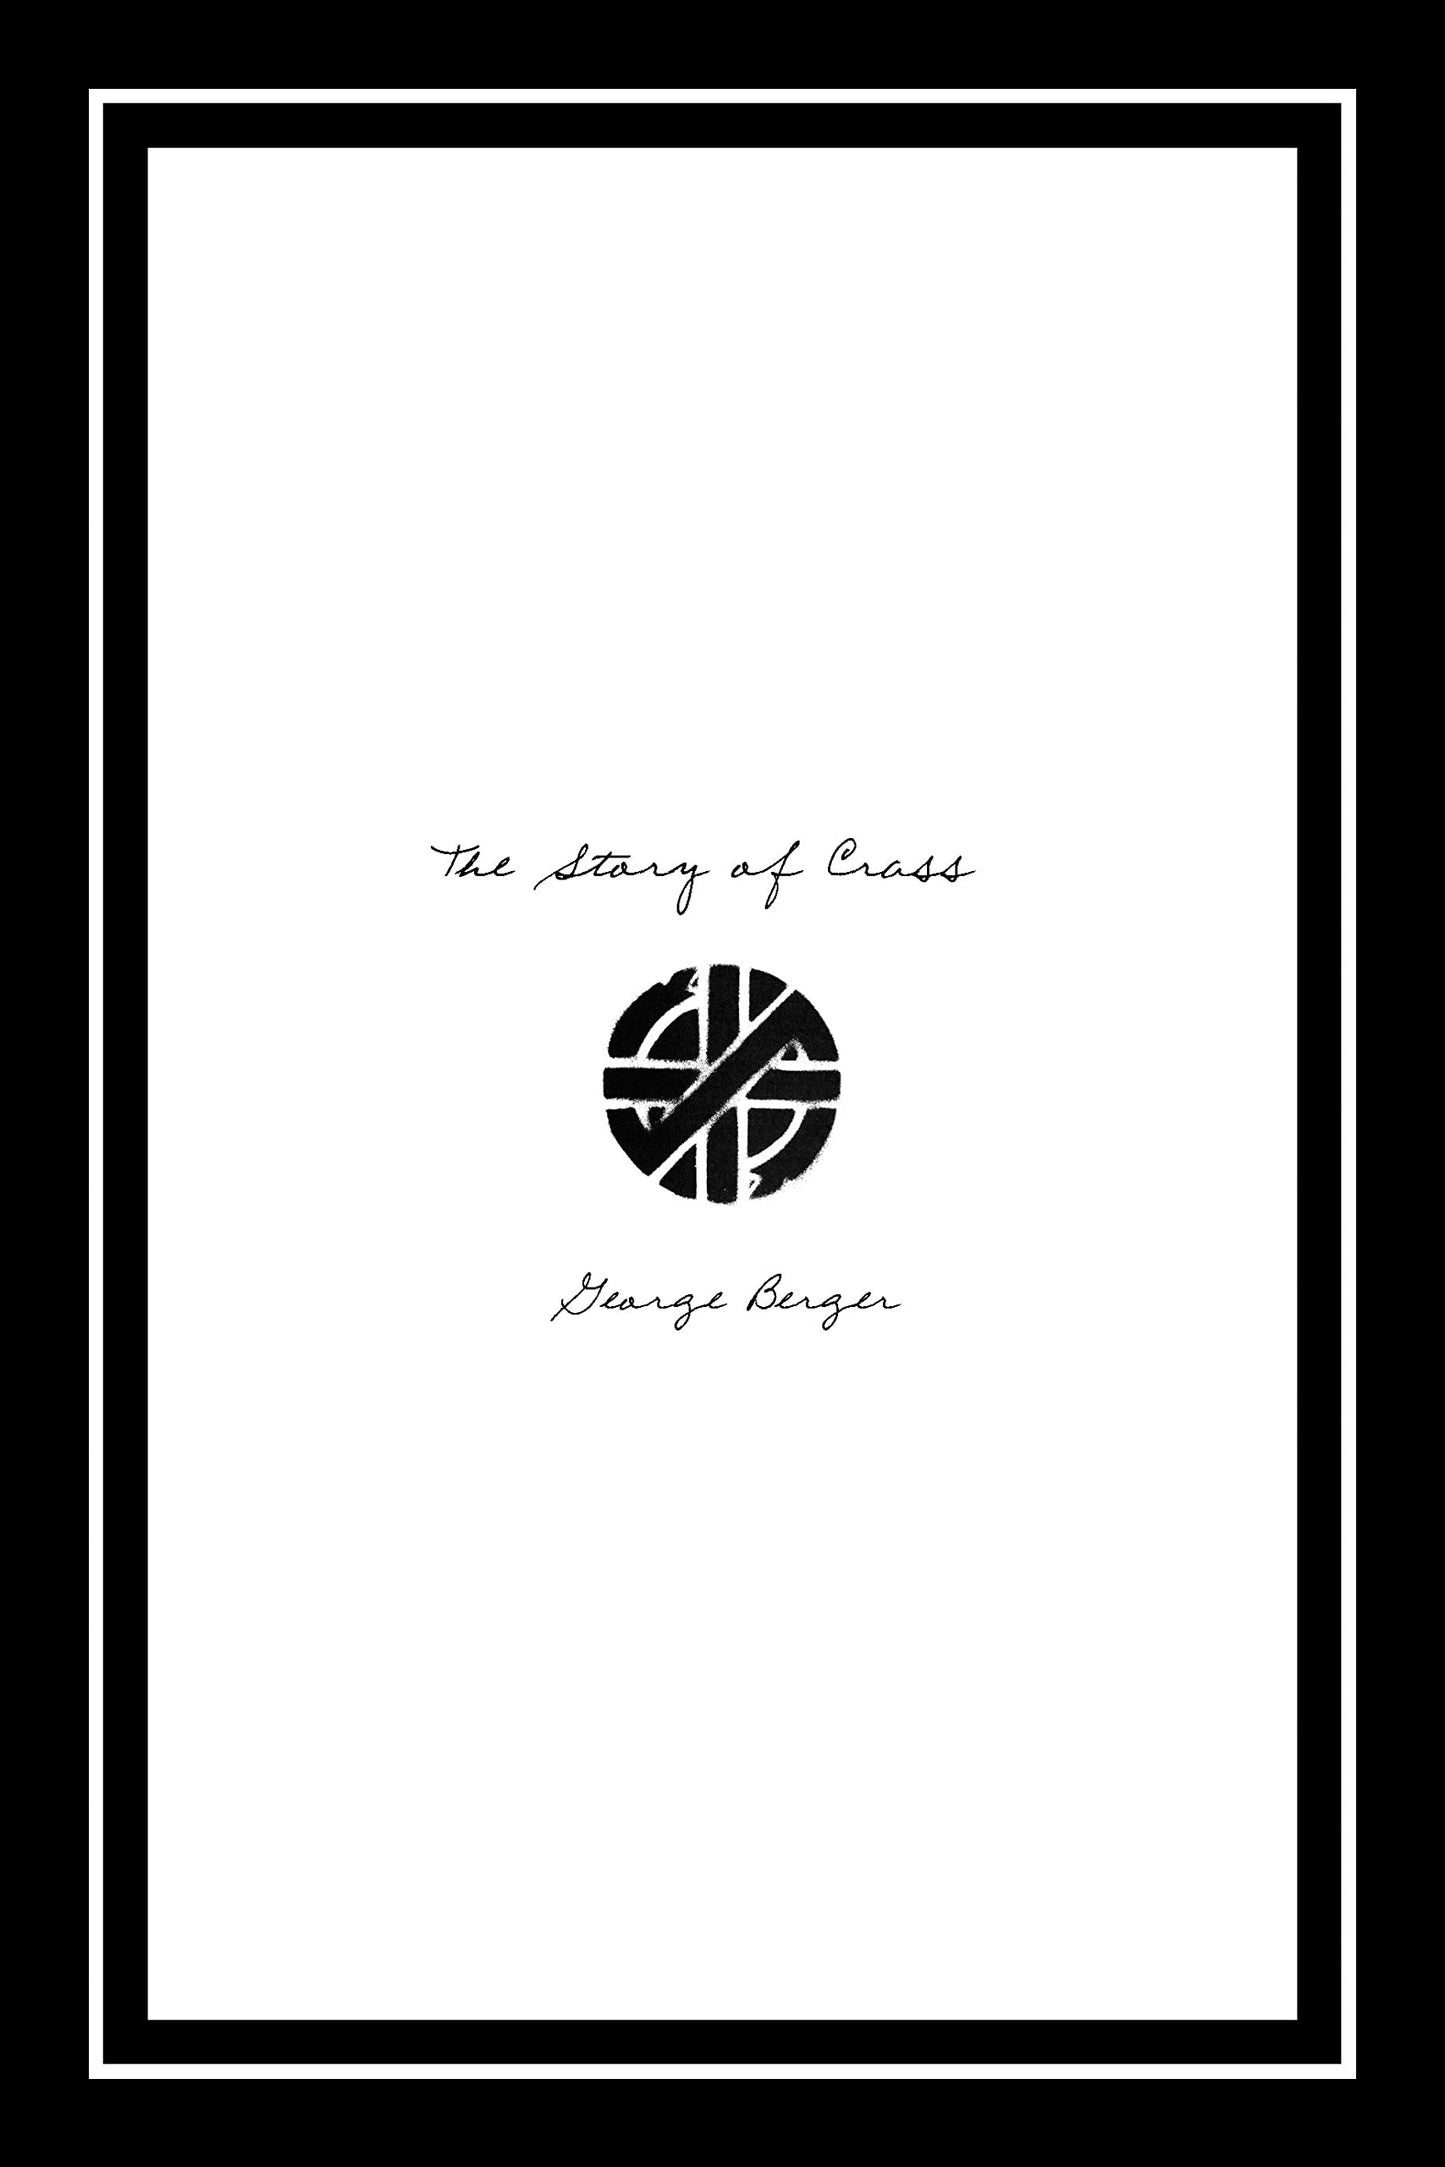 The Story of Crass, by George Berger